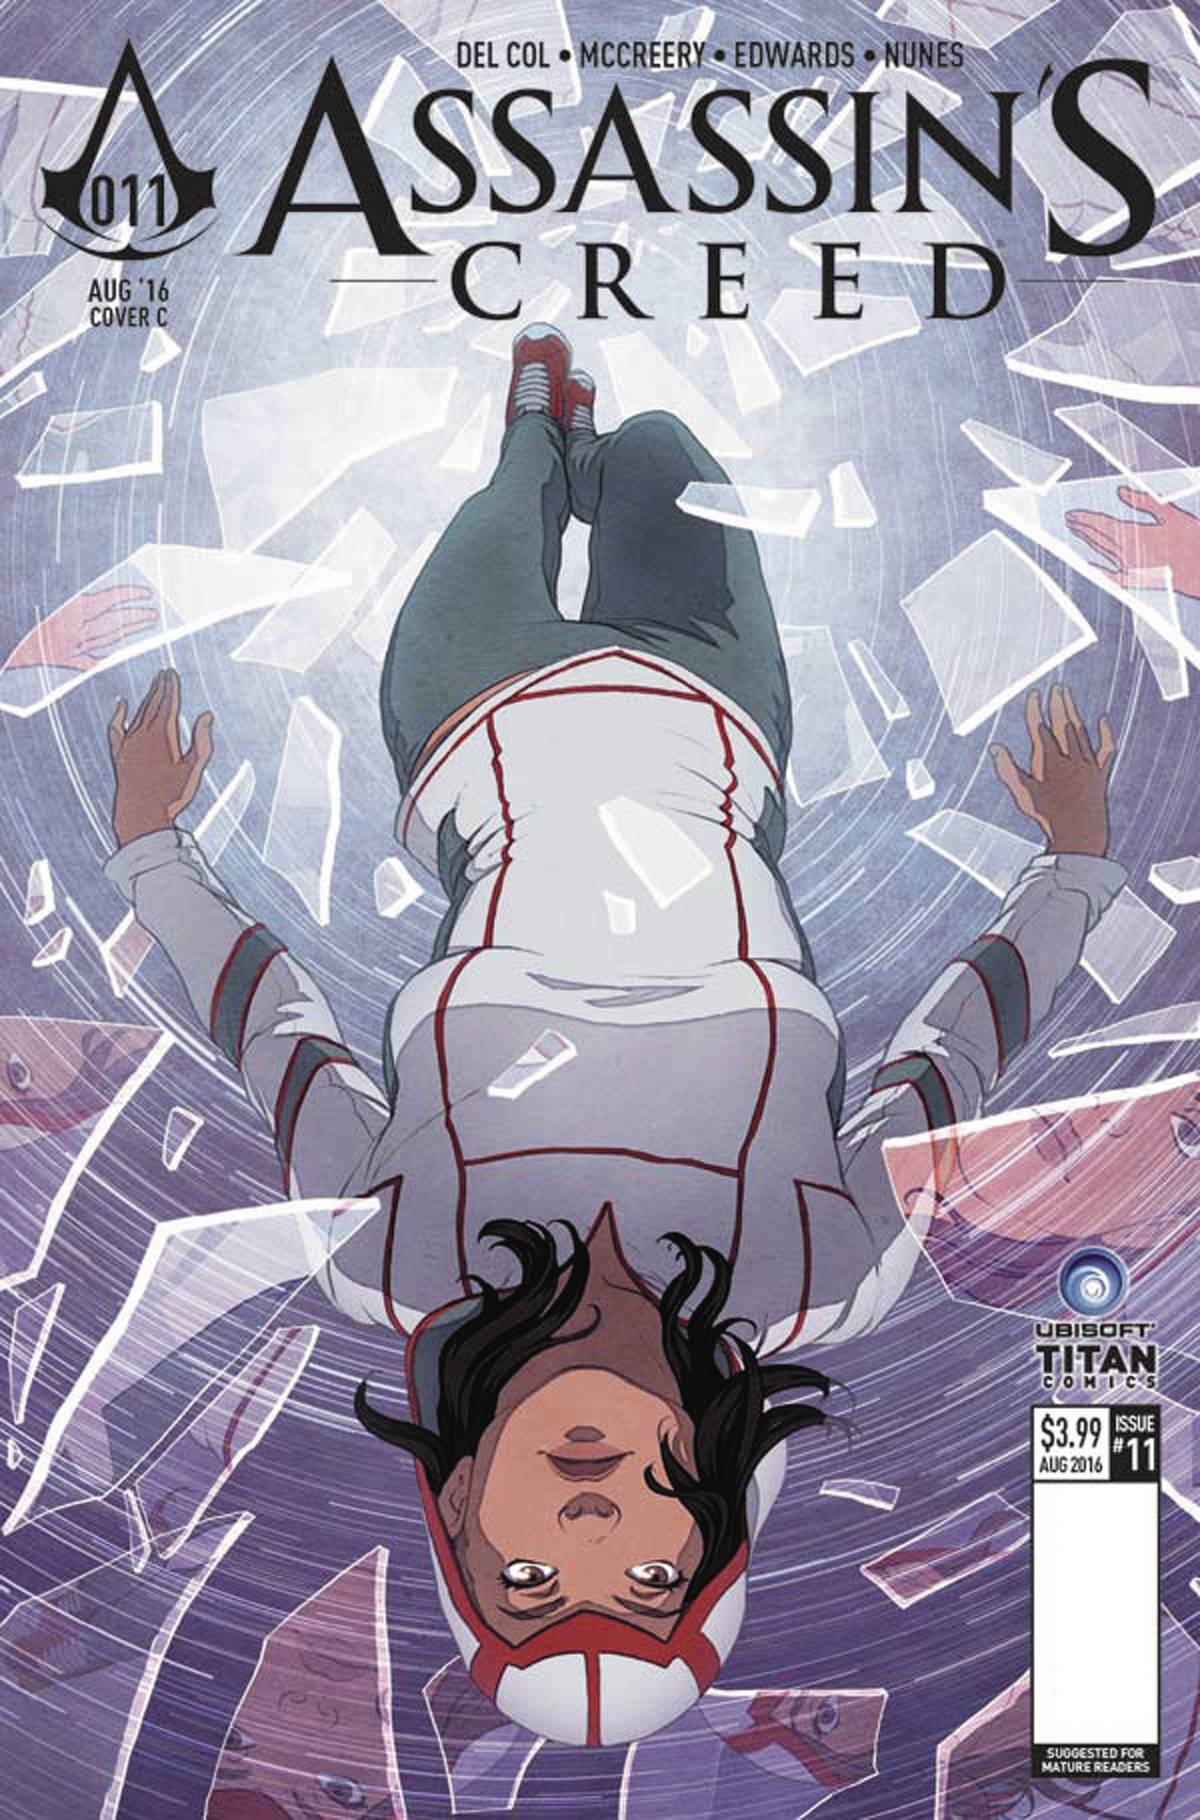 Assassins Creed #11 Cover C Duffield